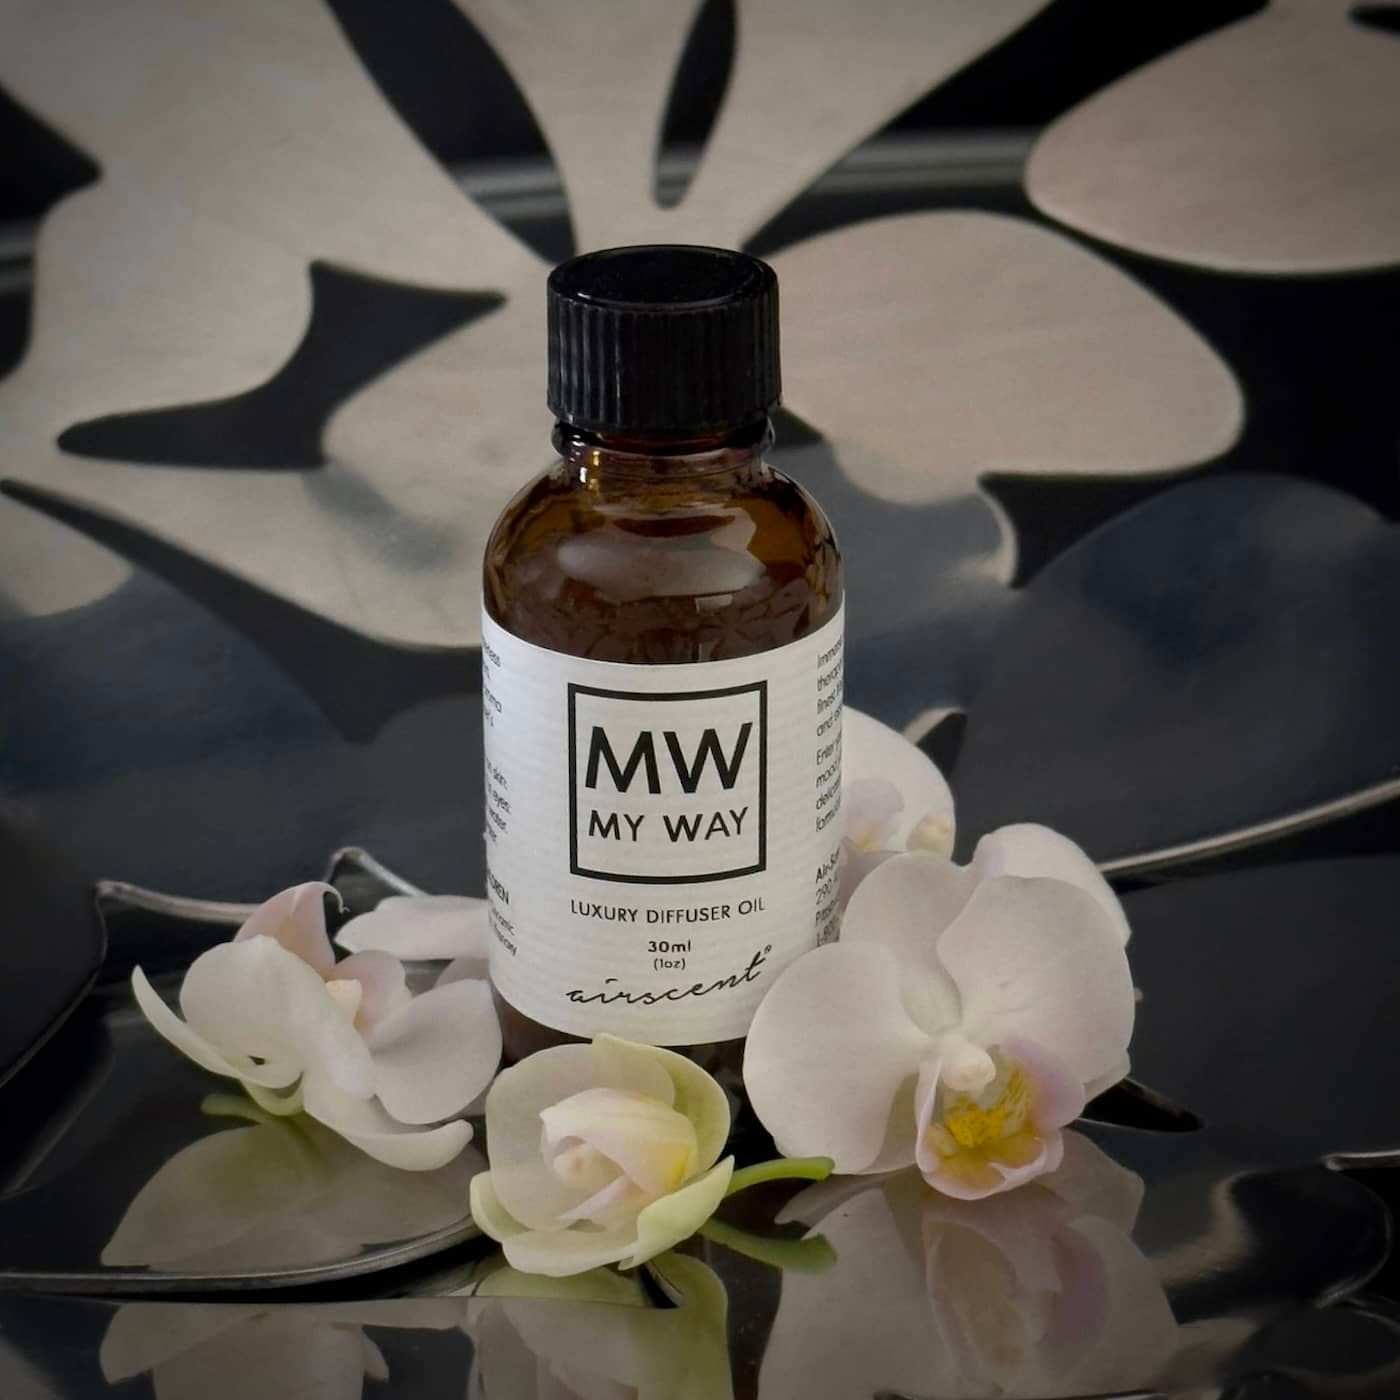 My Way 1 Hotel diffuser oil with flowers